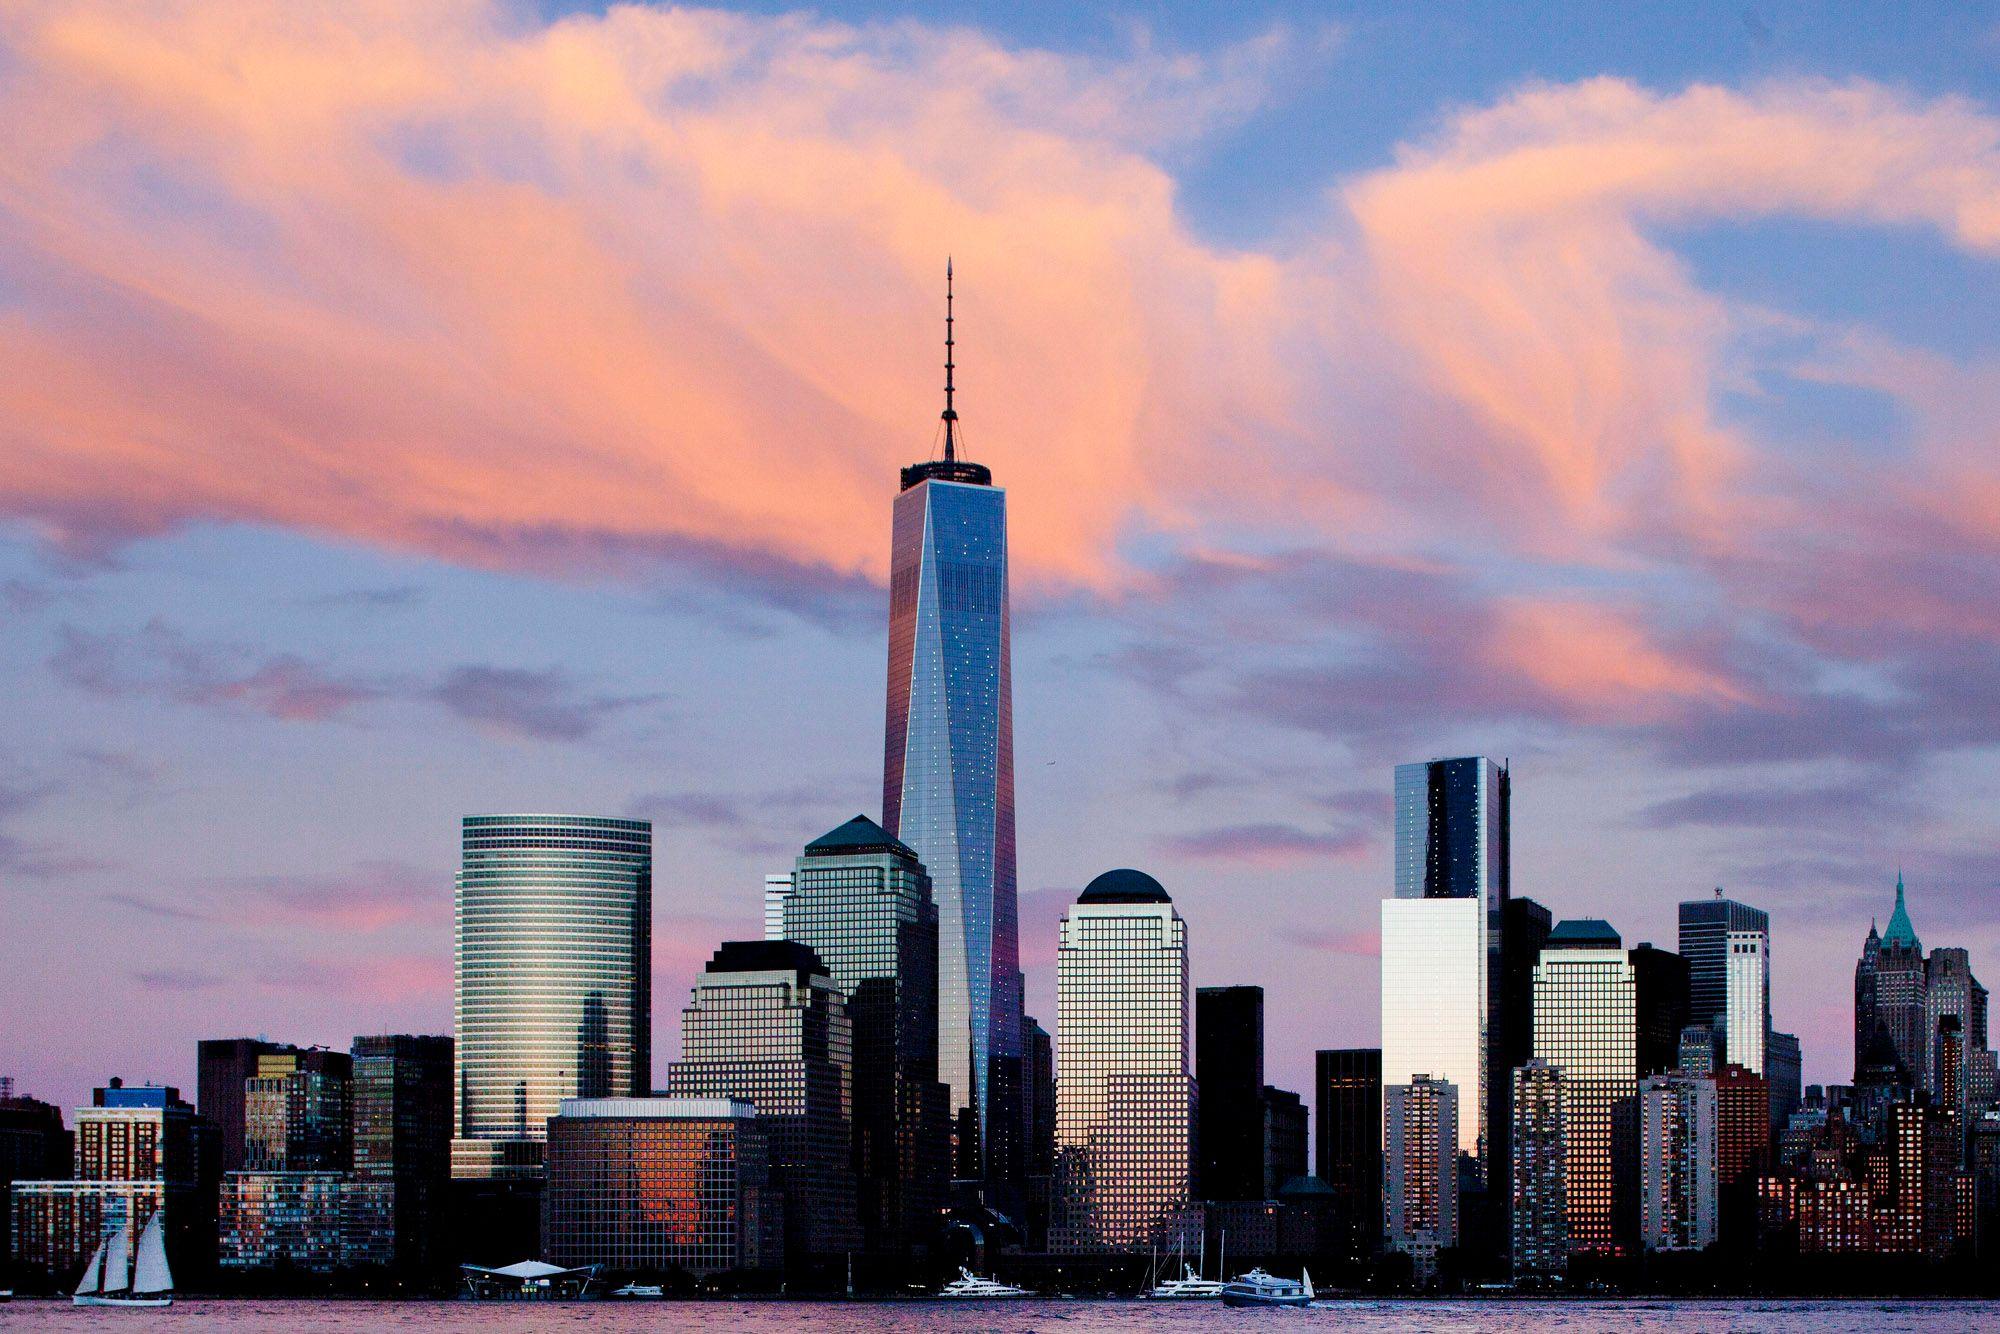 Developers say One World Trade Center will be done in early 2014